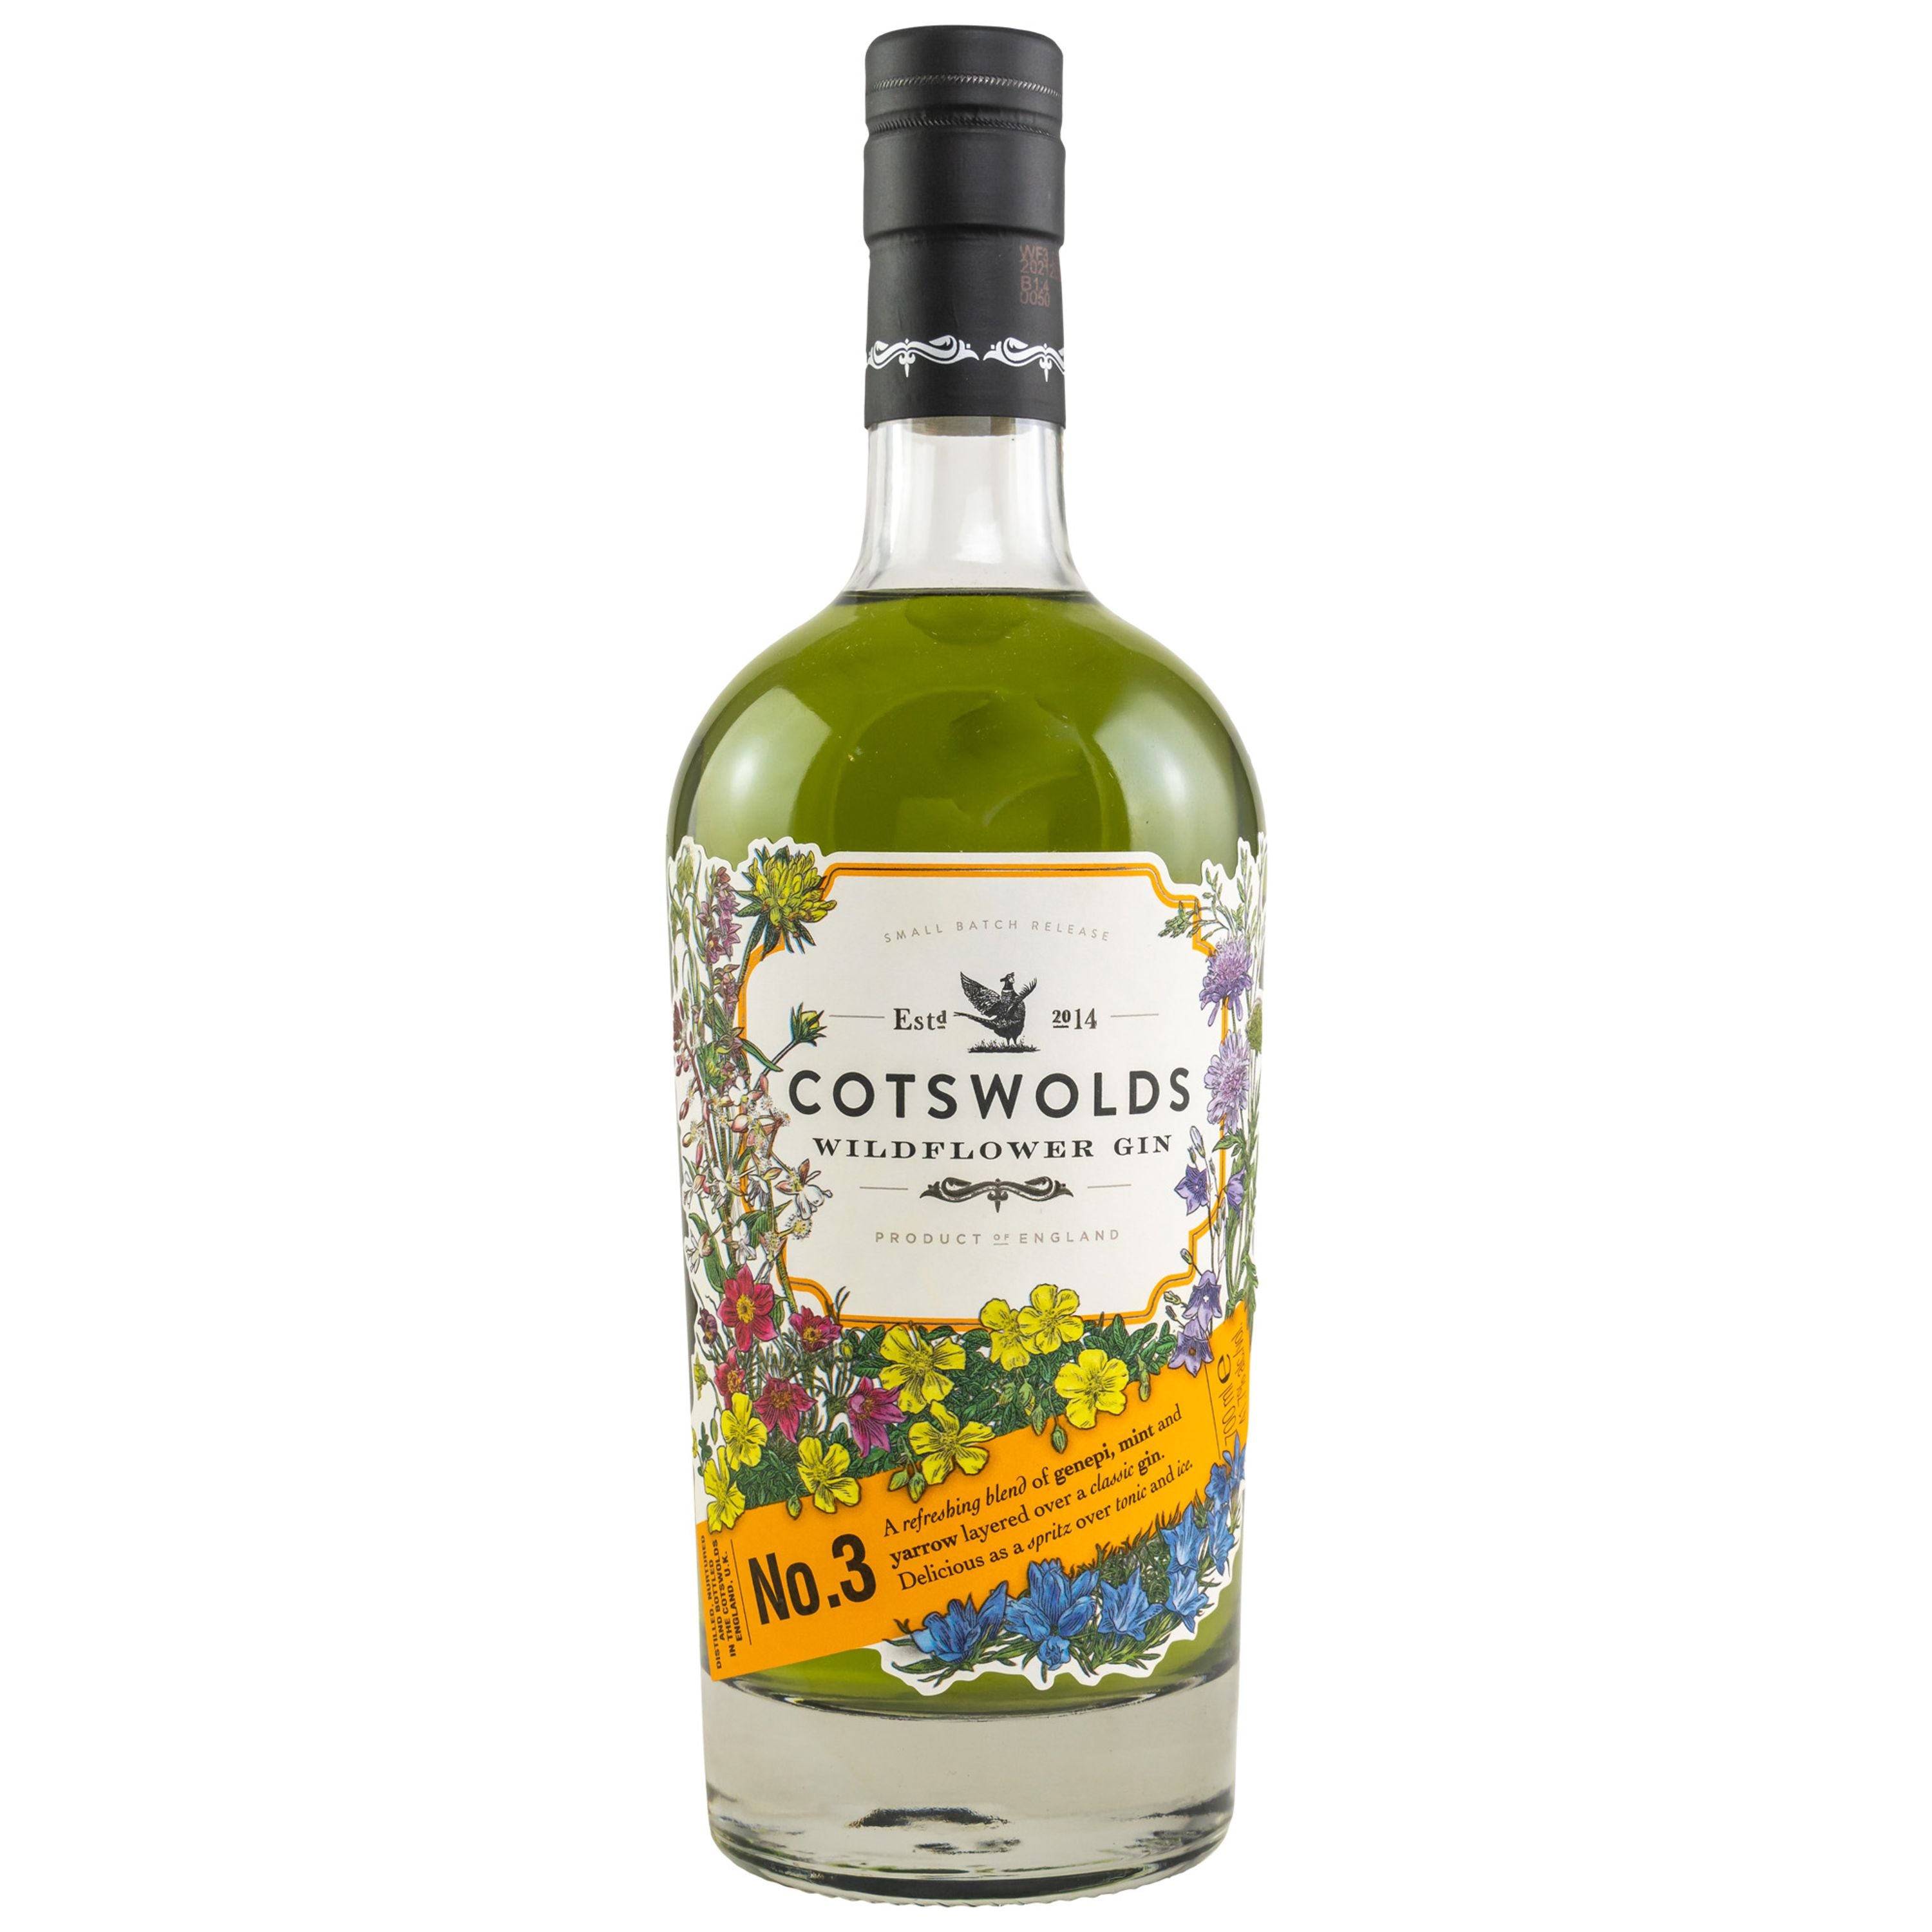 Cotswolds Wildflower Gin No.3 0.7l, alc. 41.7% ABV, Gin England